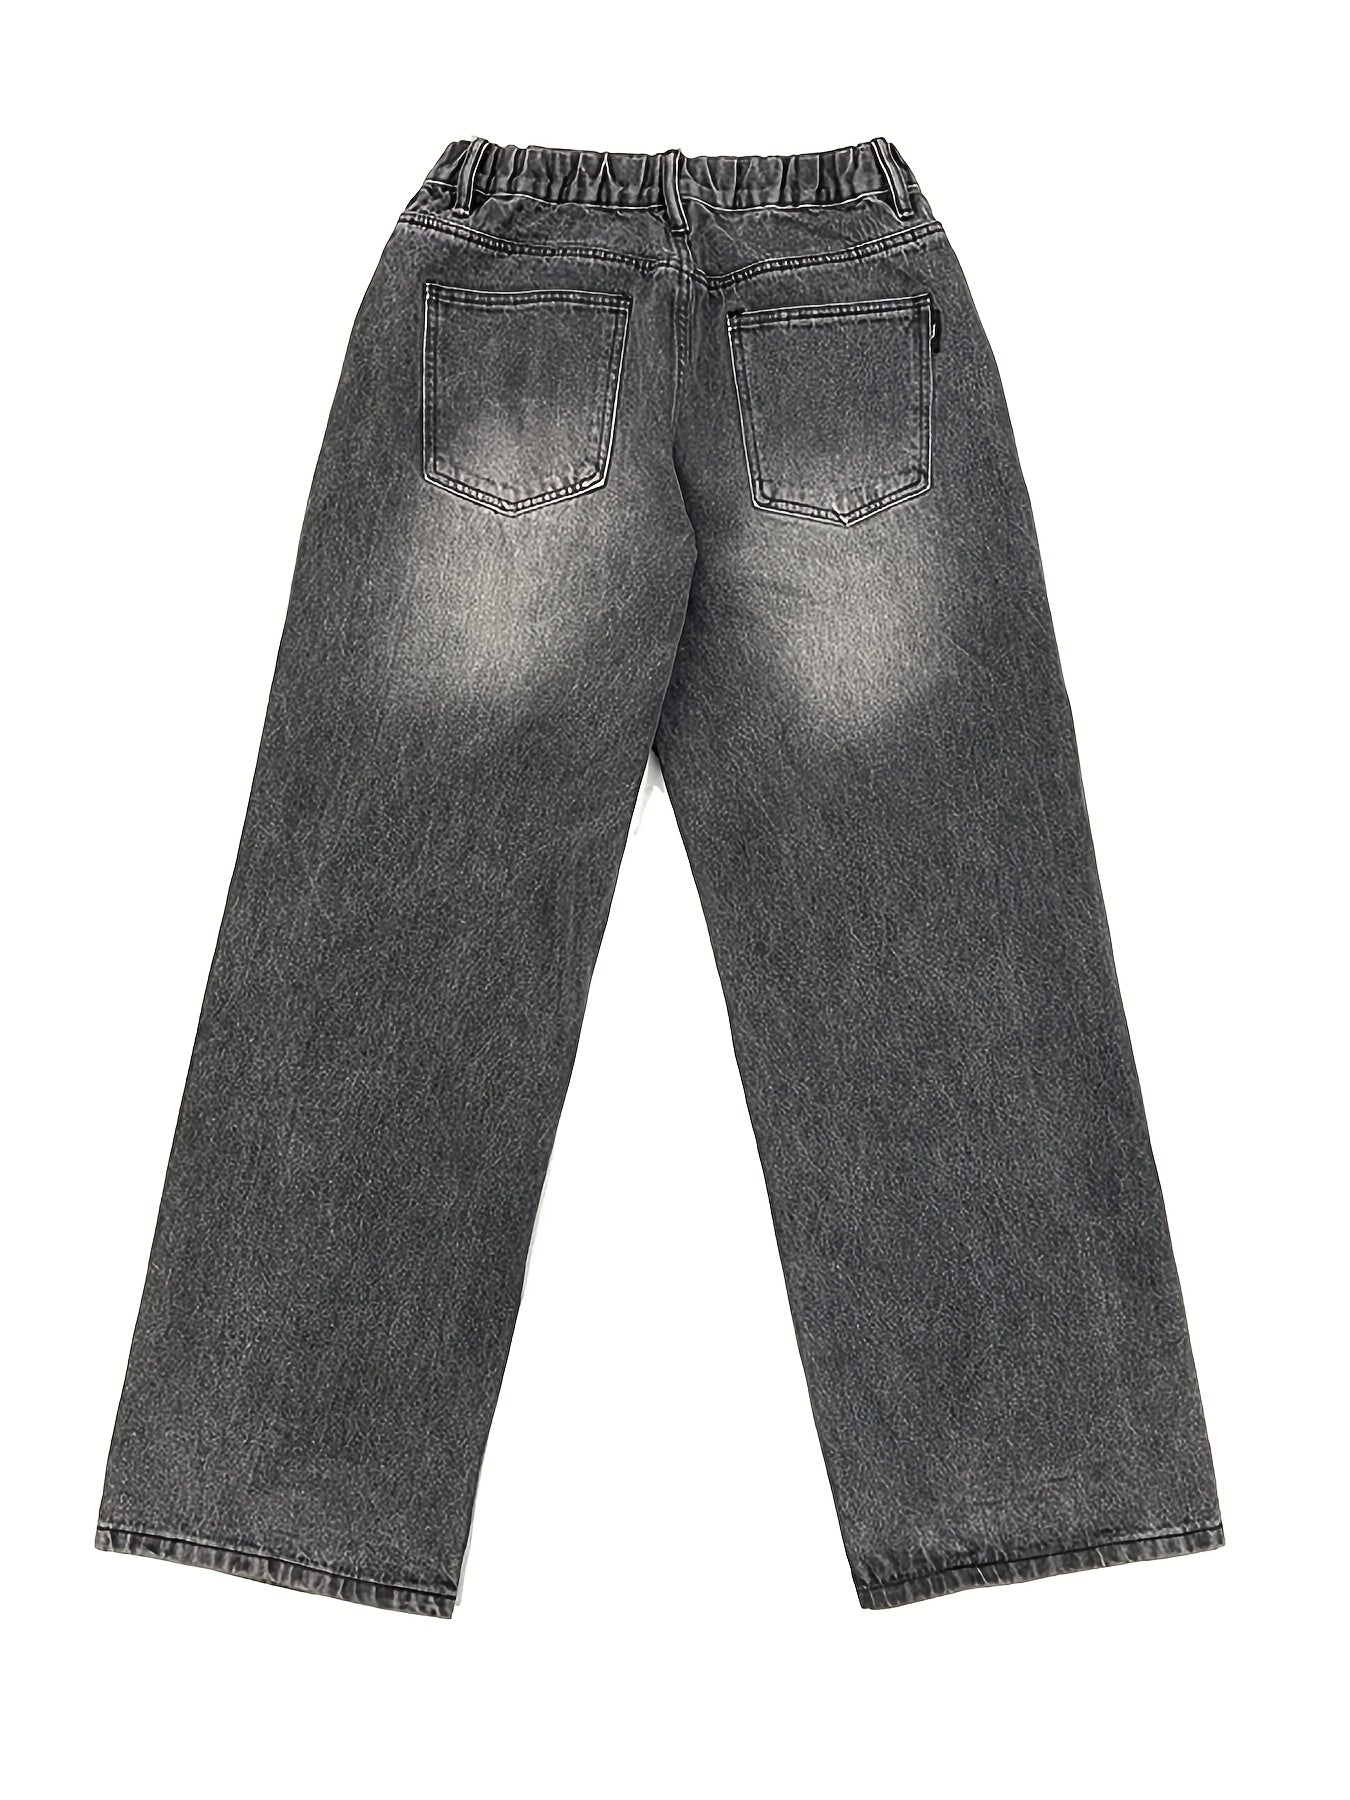 Antmvs Elastic Waist Washed Baggy Jeans, Loose Fit Washed Wide Legs Jeans, Women's Denim Jeans & Clothing